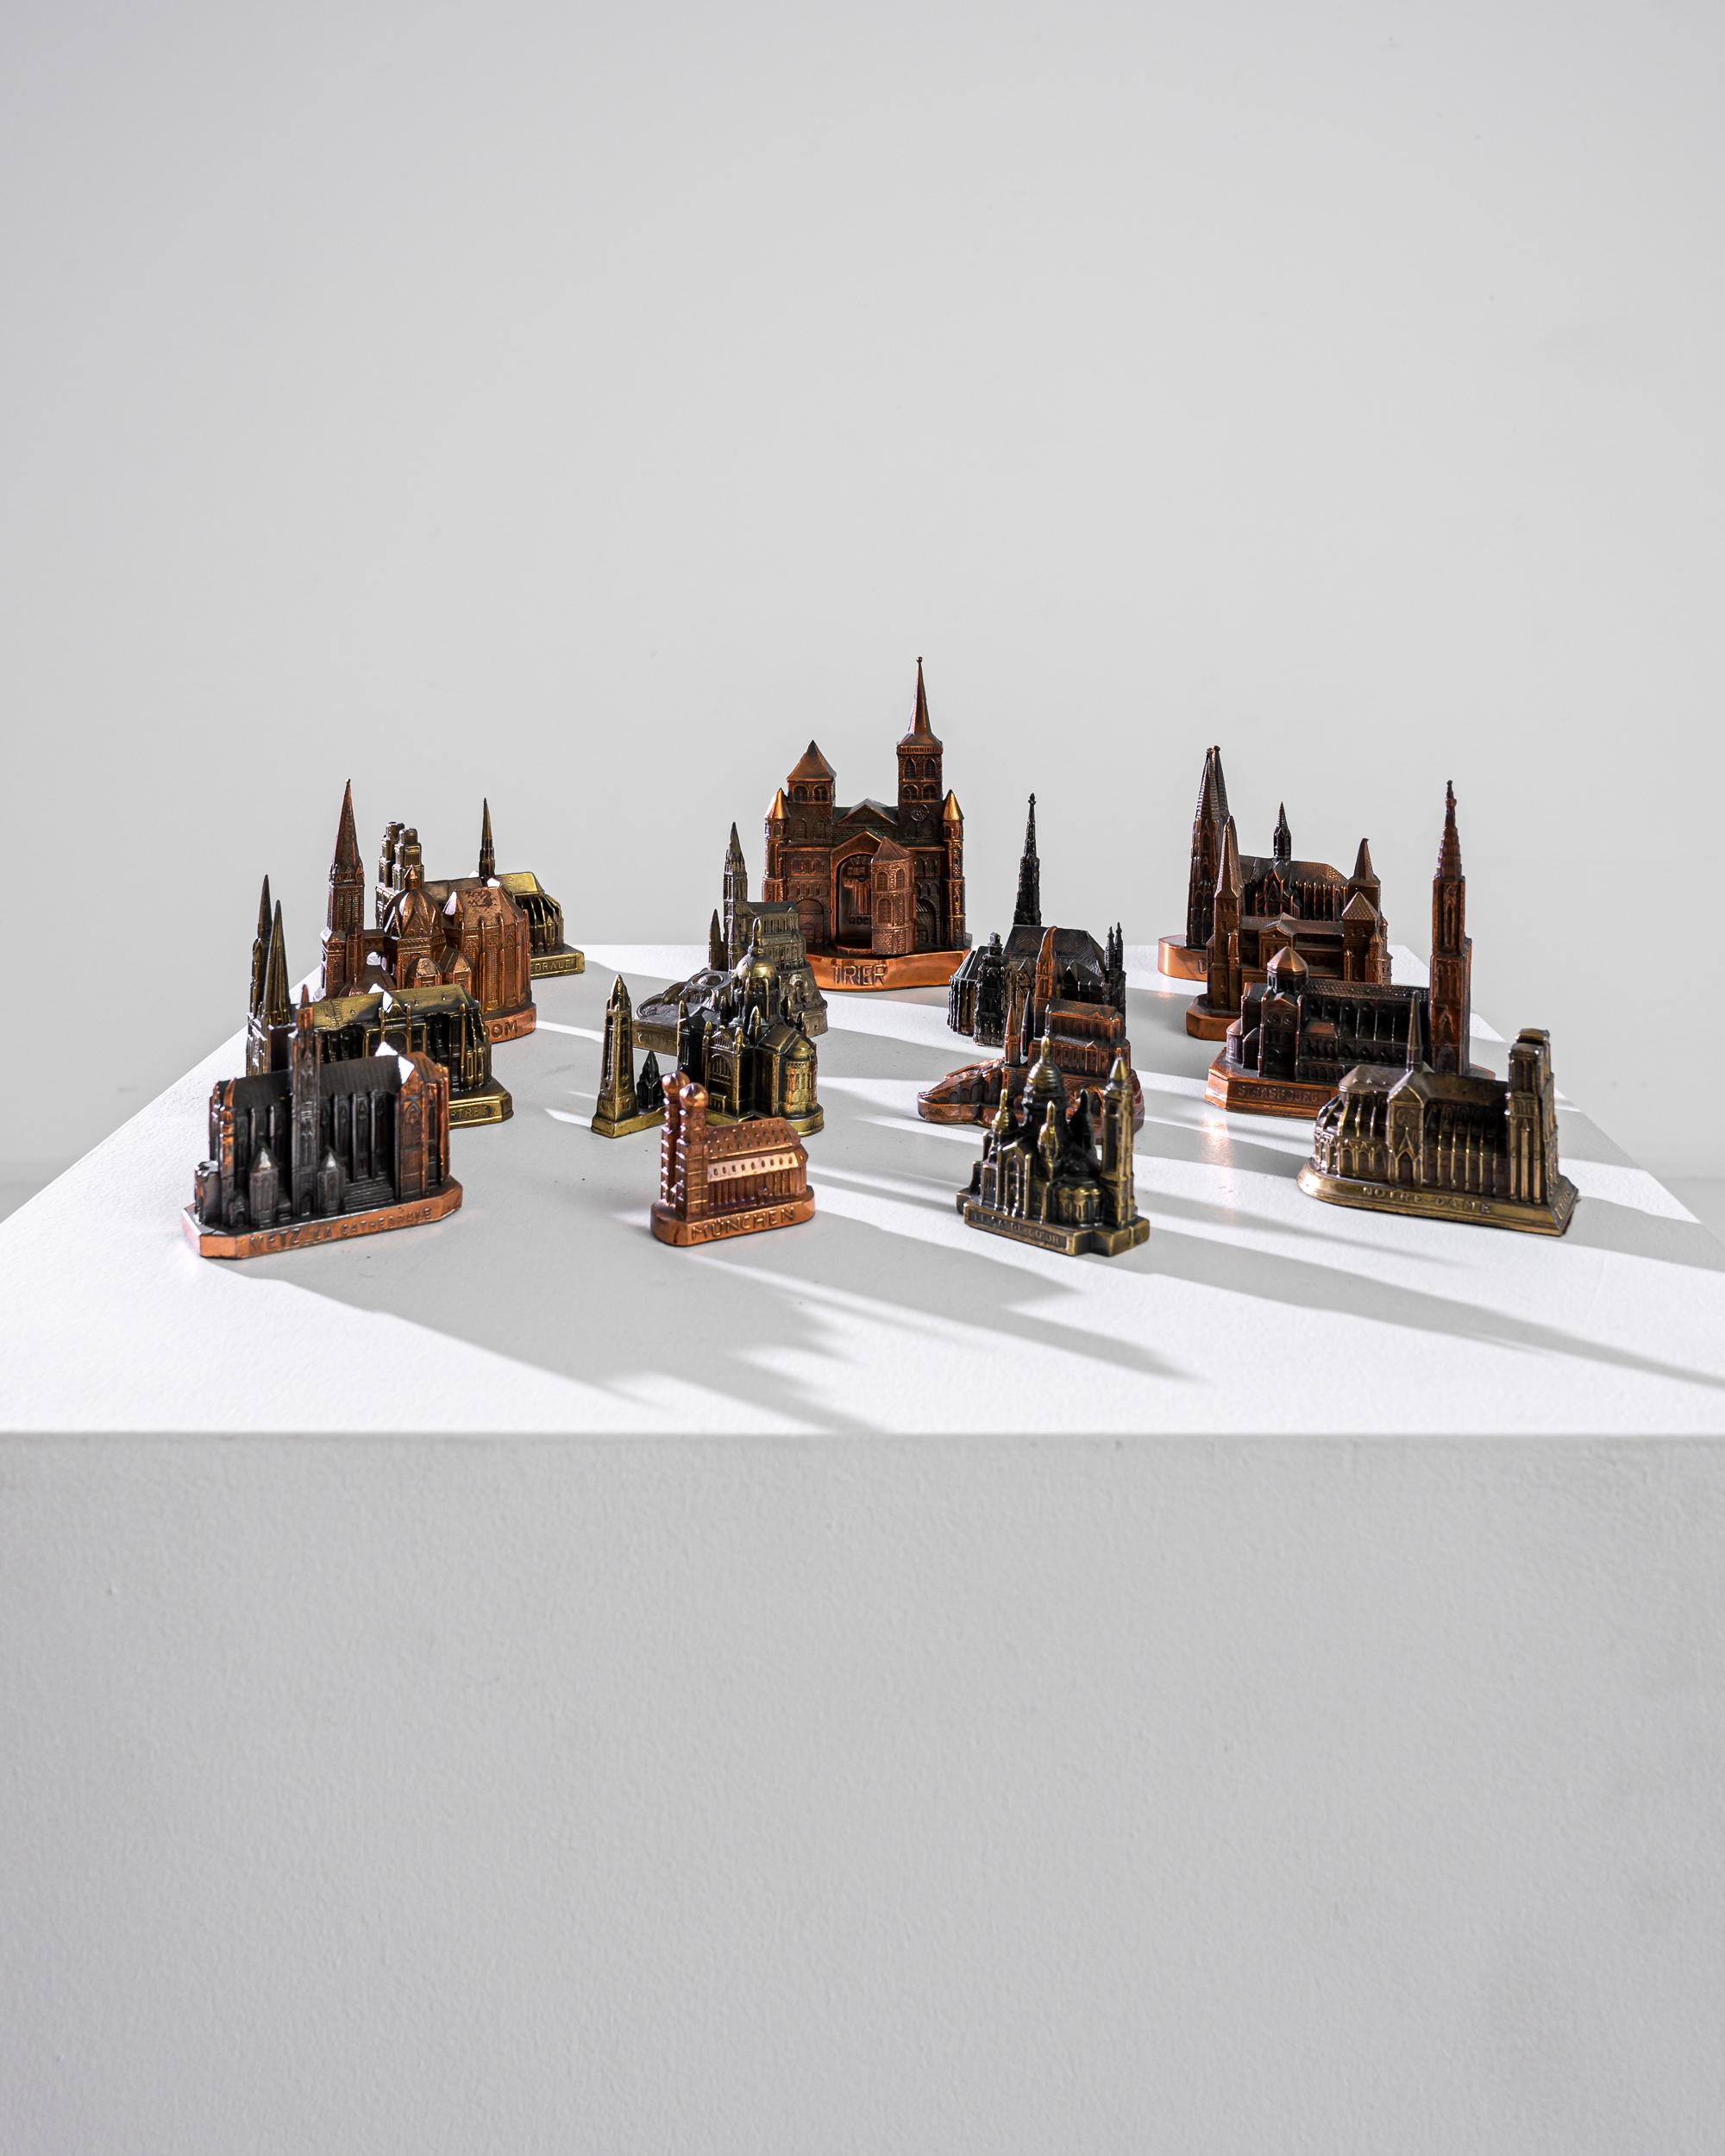 This gorgeous vintage set of metal figurines features 15 miniature replicas of Europe’s iconic churches such as Notre Dam, Metz Cathedral and the Basilica of the Sacred Heart of Paris among others. Meticulously chiseled architectural details of the